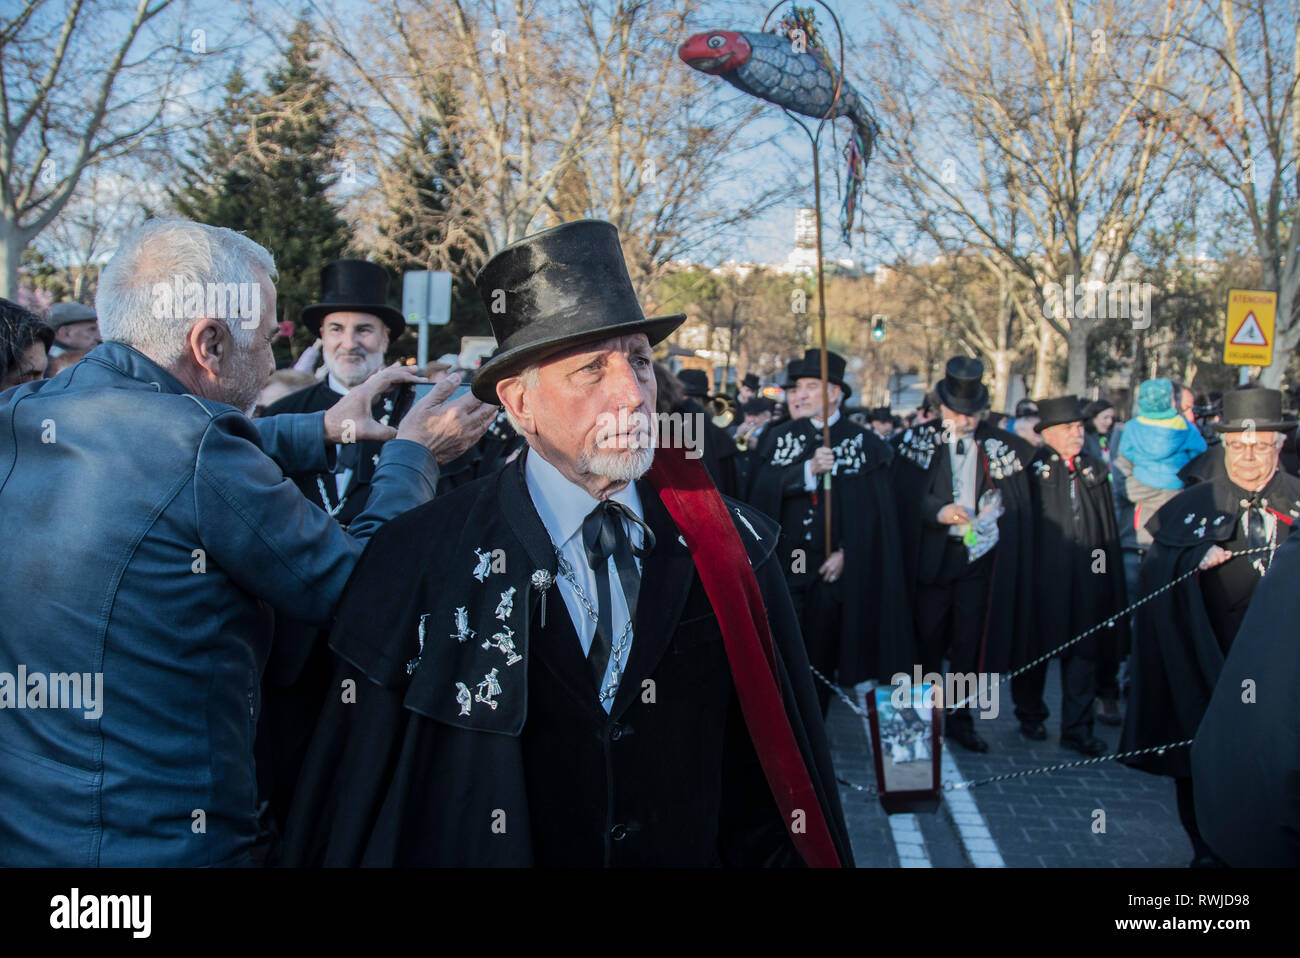 Madrid, Spain. 06th Mar, 2019. The origins of the Alegre Confraternity of the Burial of the Sardine could go back to the reign of Carlos III, because according to the popular tradition to the Madrid of the time arrived a game of rotten fish to the markets, causing the consequent stench in all the city. To address this problem, the king issued an edict ordering the burial of said fish on the banks of the Manzanares River. Credit: Alberto Sibaja Ramírez/Alamy Live News Stock Photo